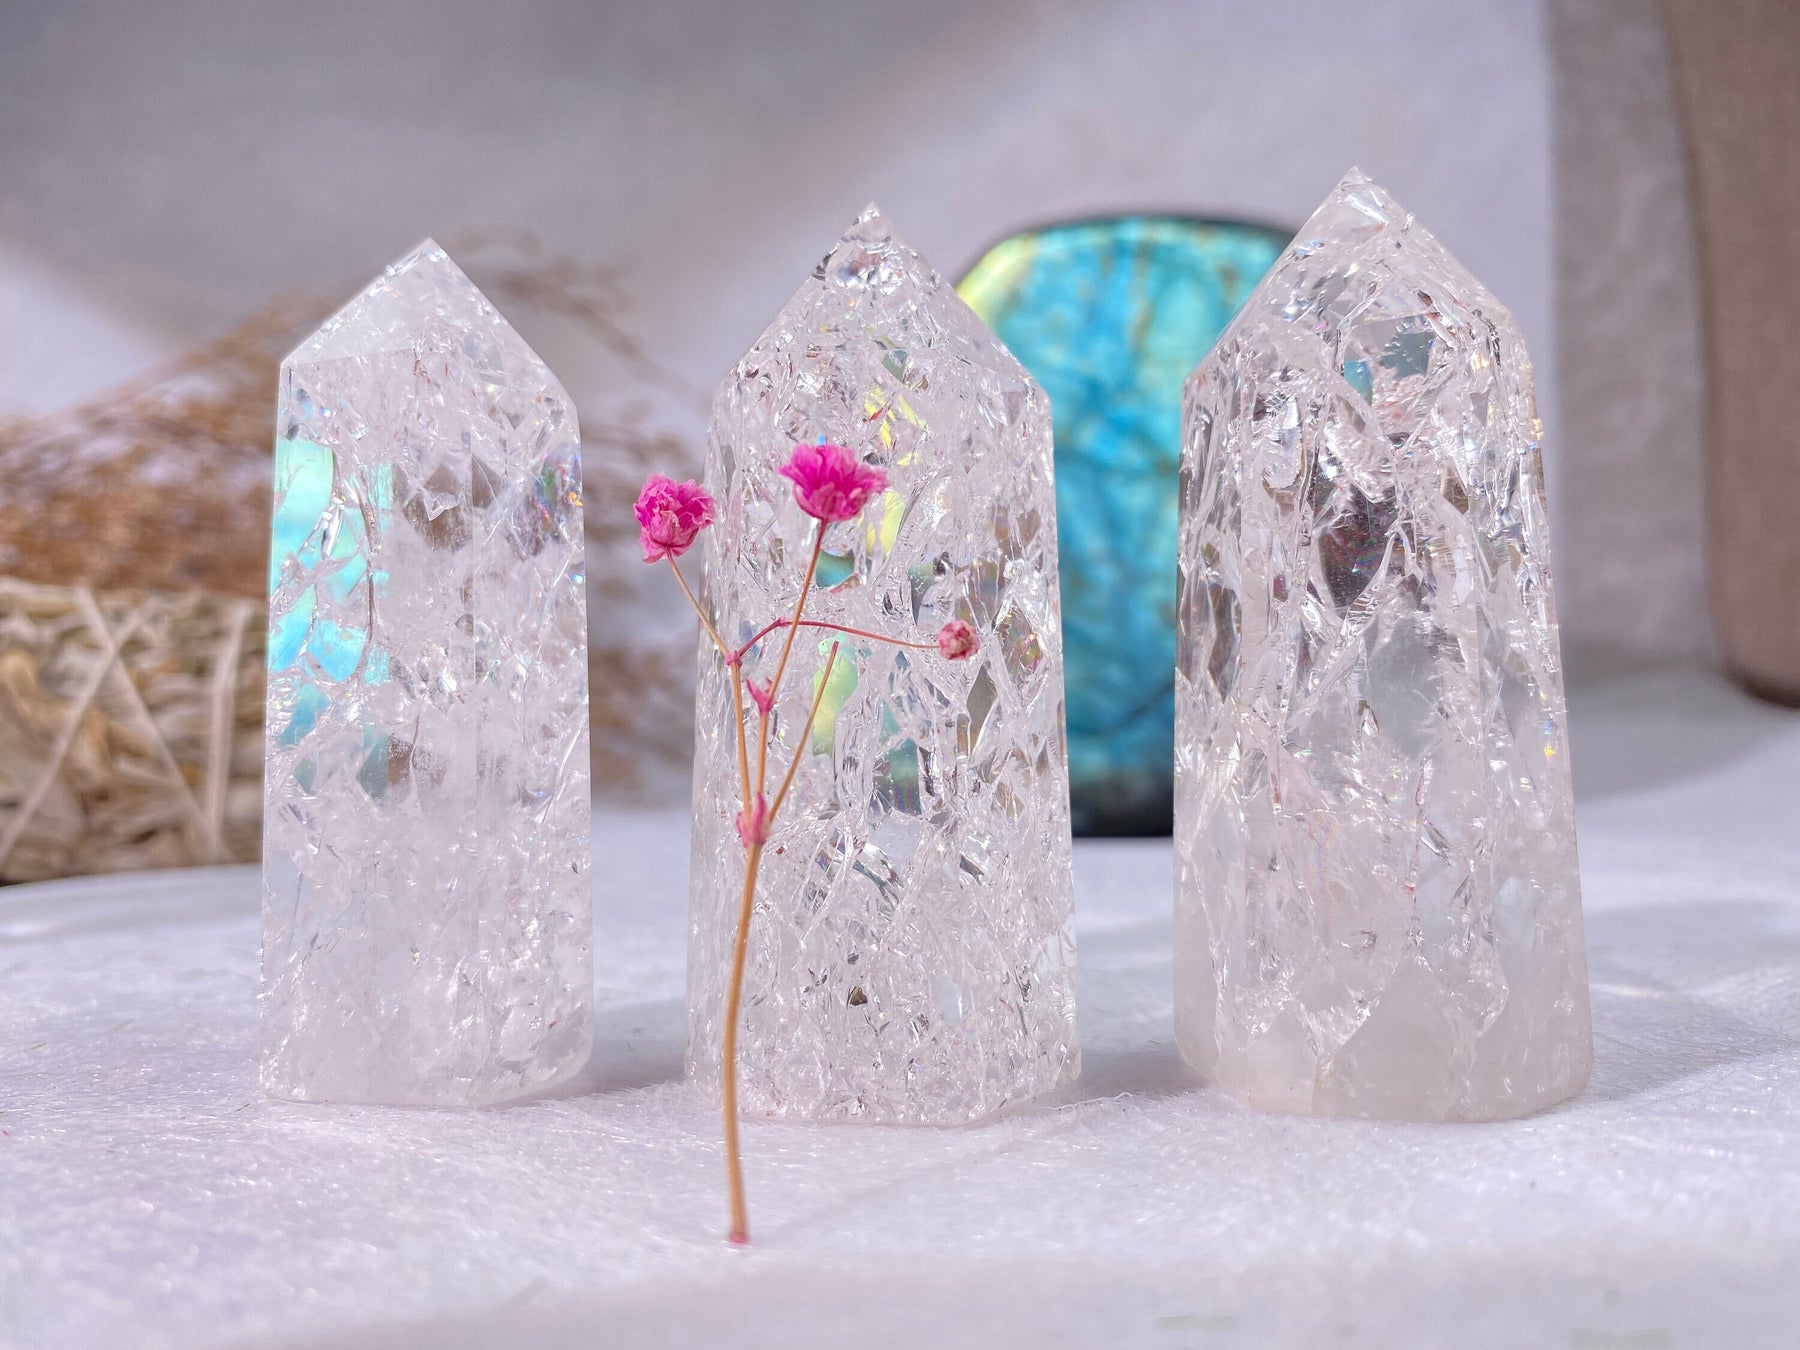 Fire and Ice Crystal Tower crackle quartz